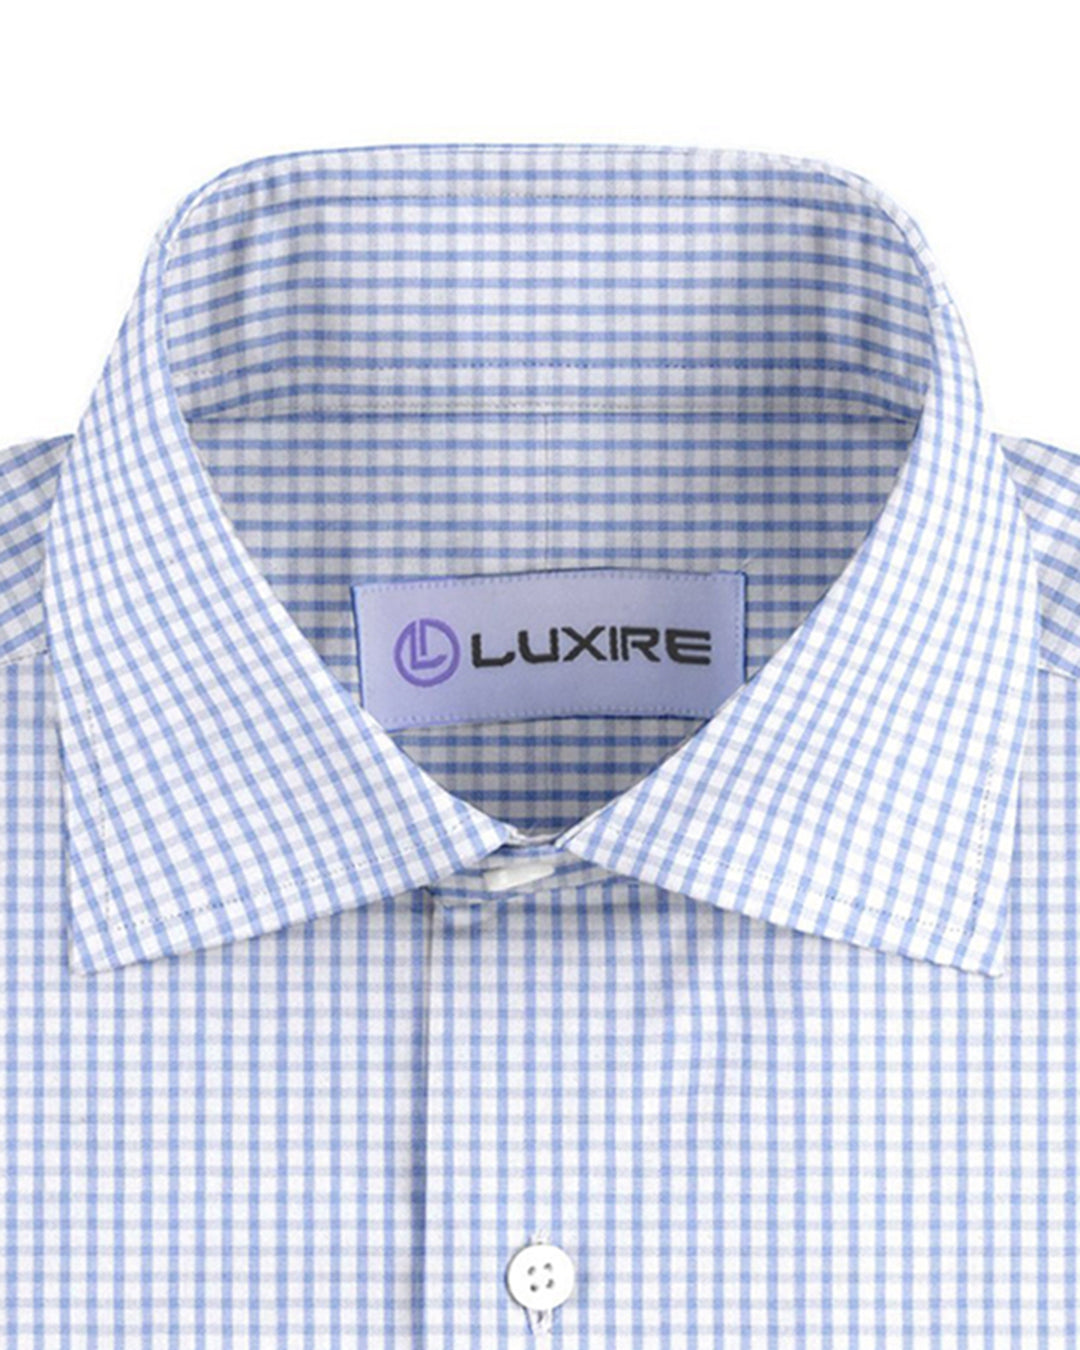 Front close view of custom check shirts for men by Luxire blue pink and white